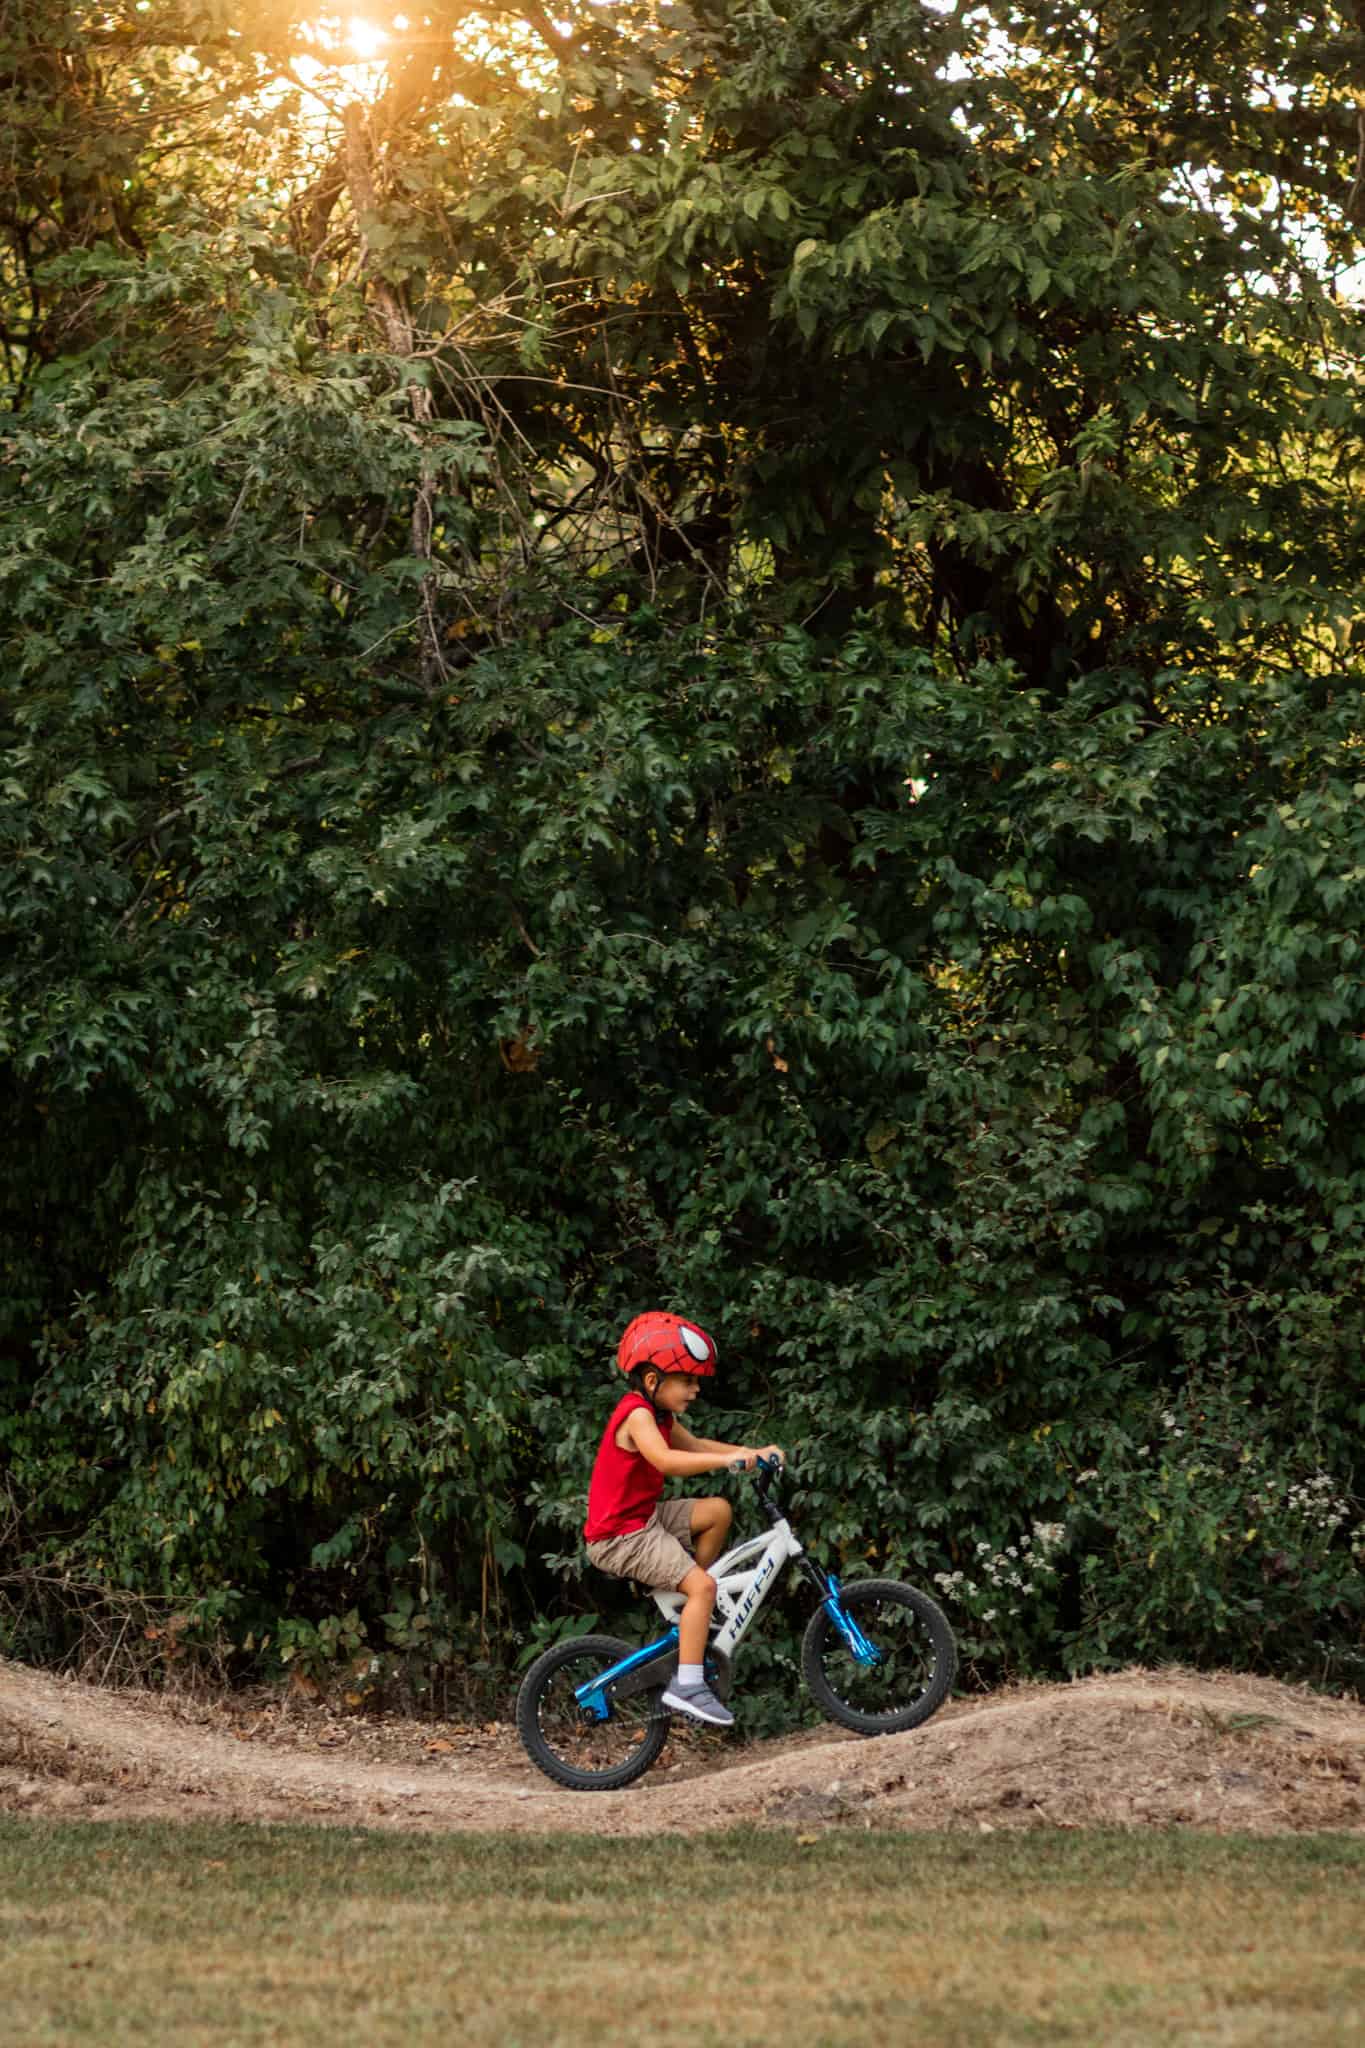 Child in red shirt and helmet riding bike over ramp